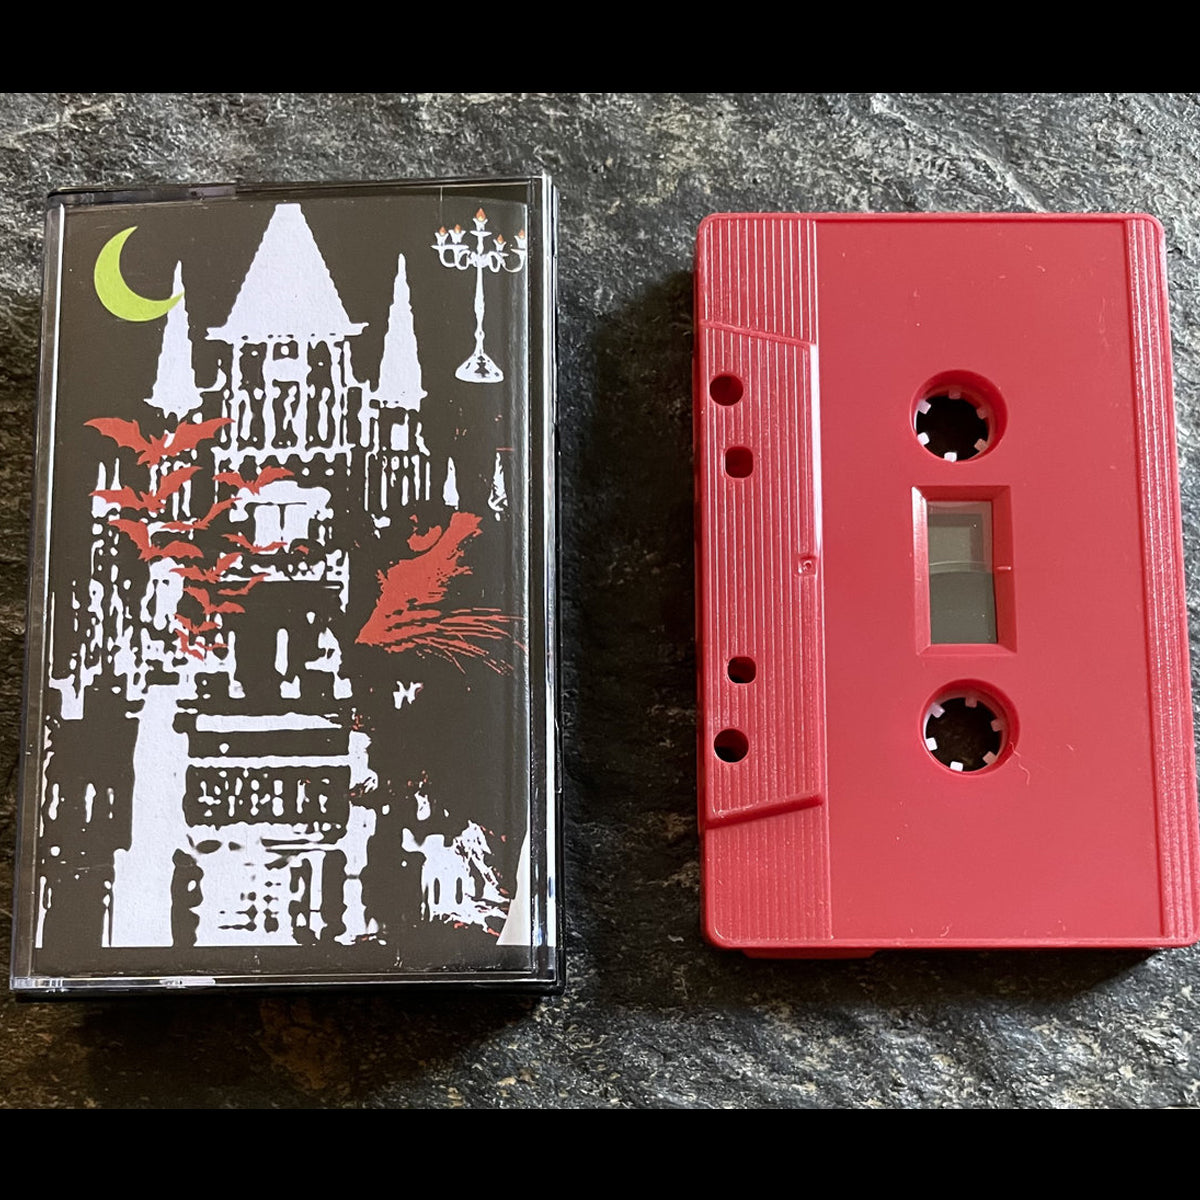 [SOLD OUT] UNEARTHLY GASP "I" cassette tape (lim.100)